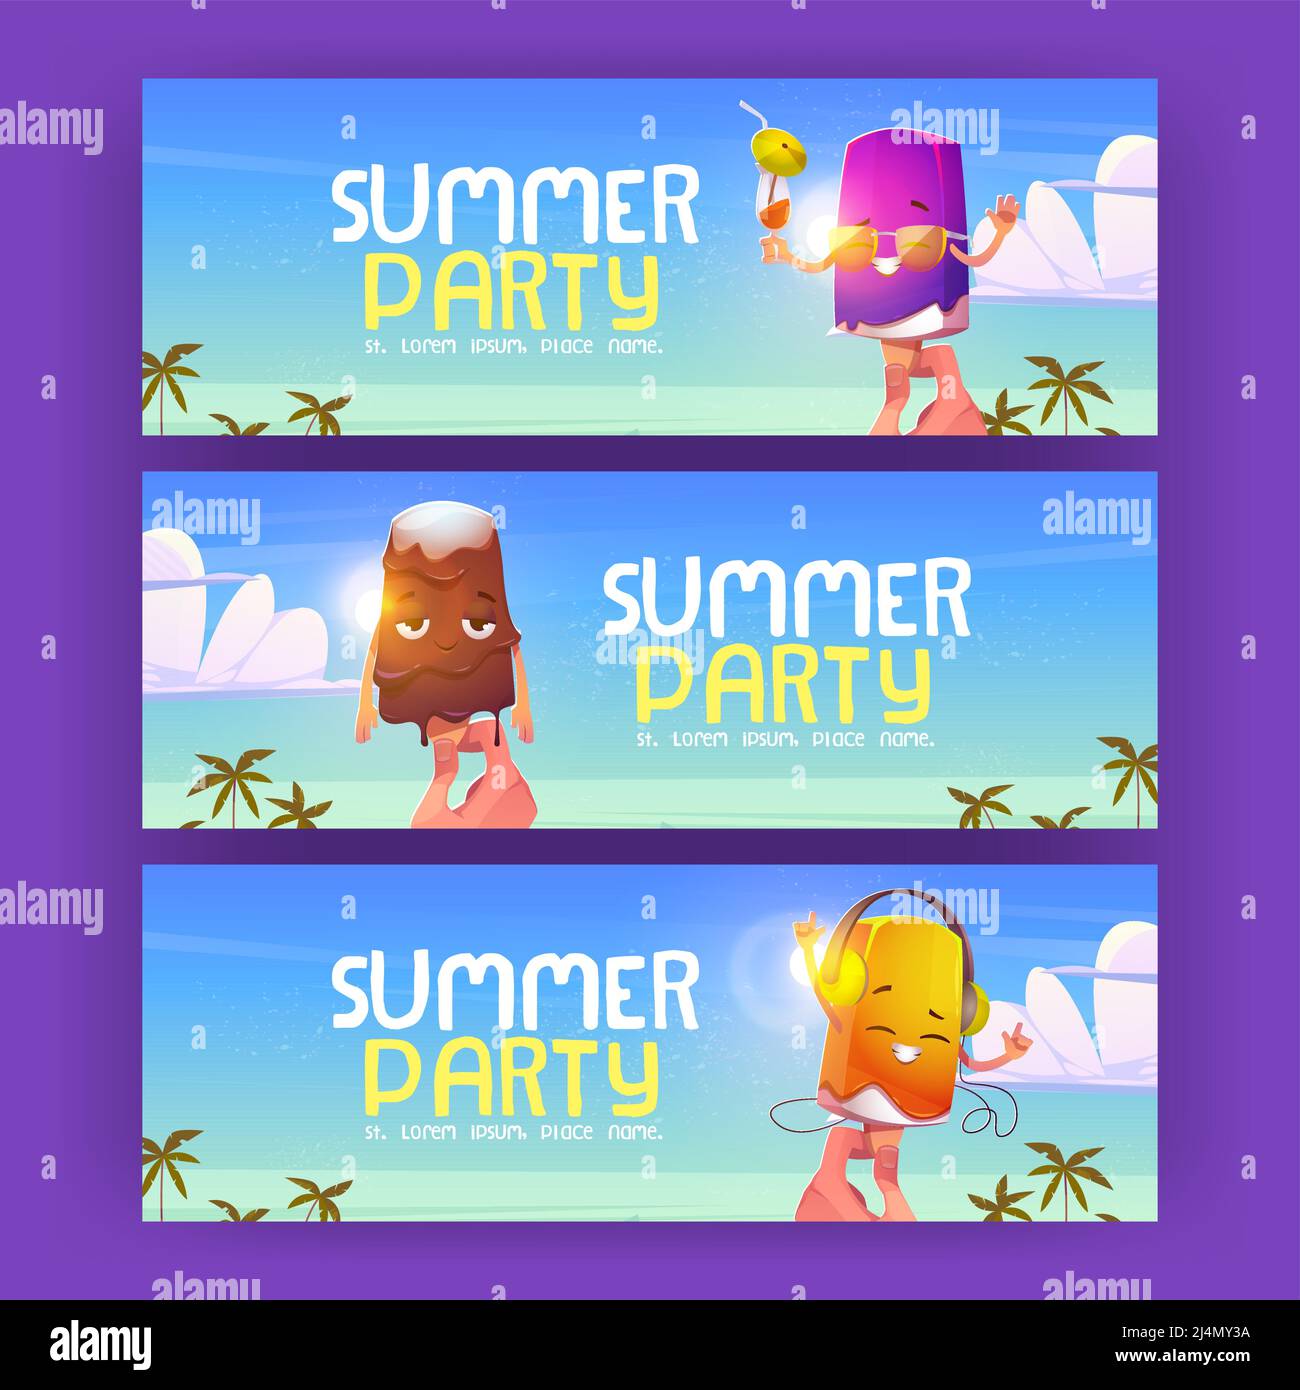 Summer party flyers with cute ice cream on beach. Vector posters with cartoon illustration with hand holding popsicle. Chocolate icecream on stick mel Stock Vector